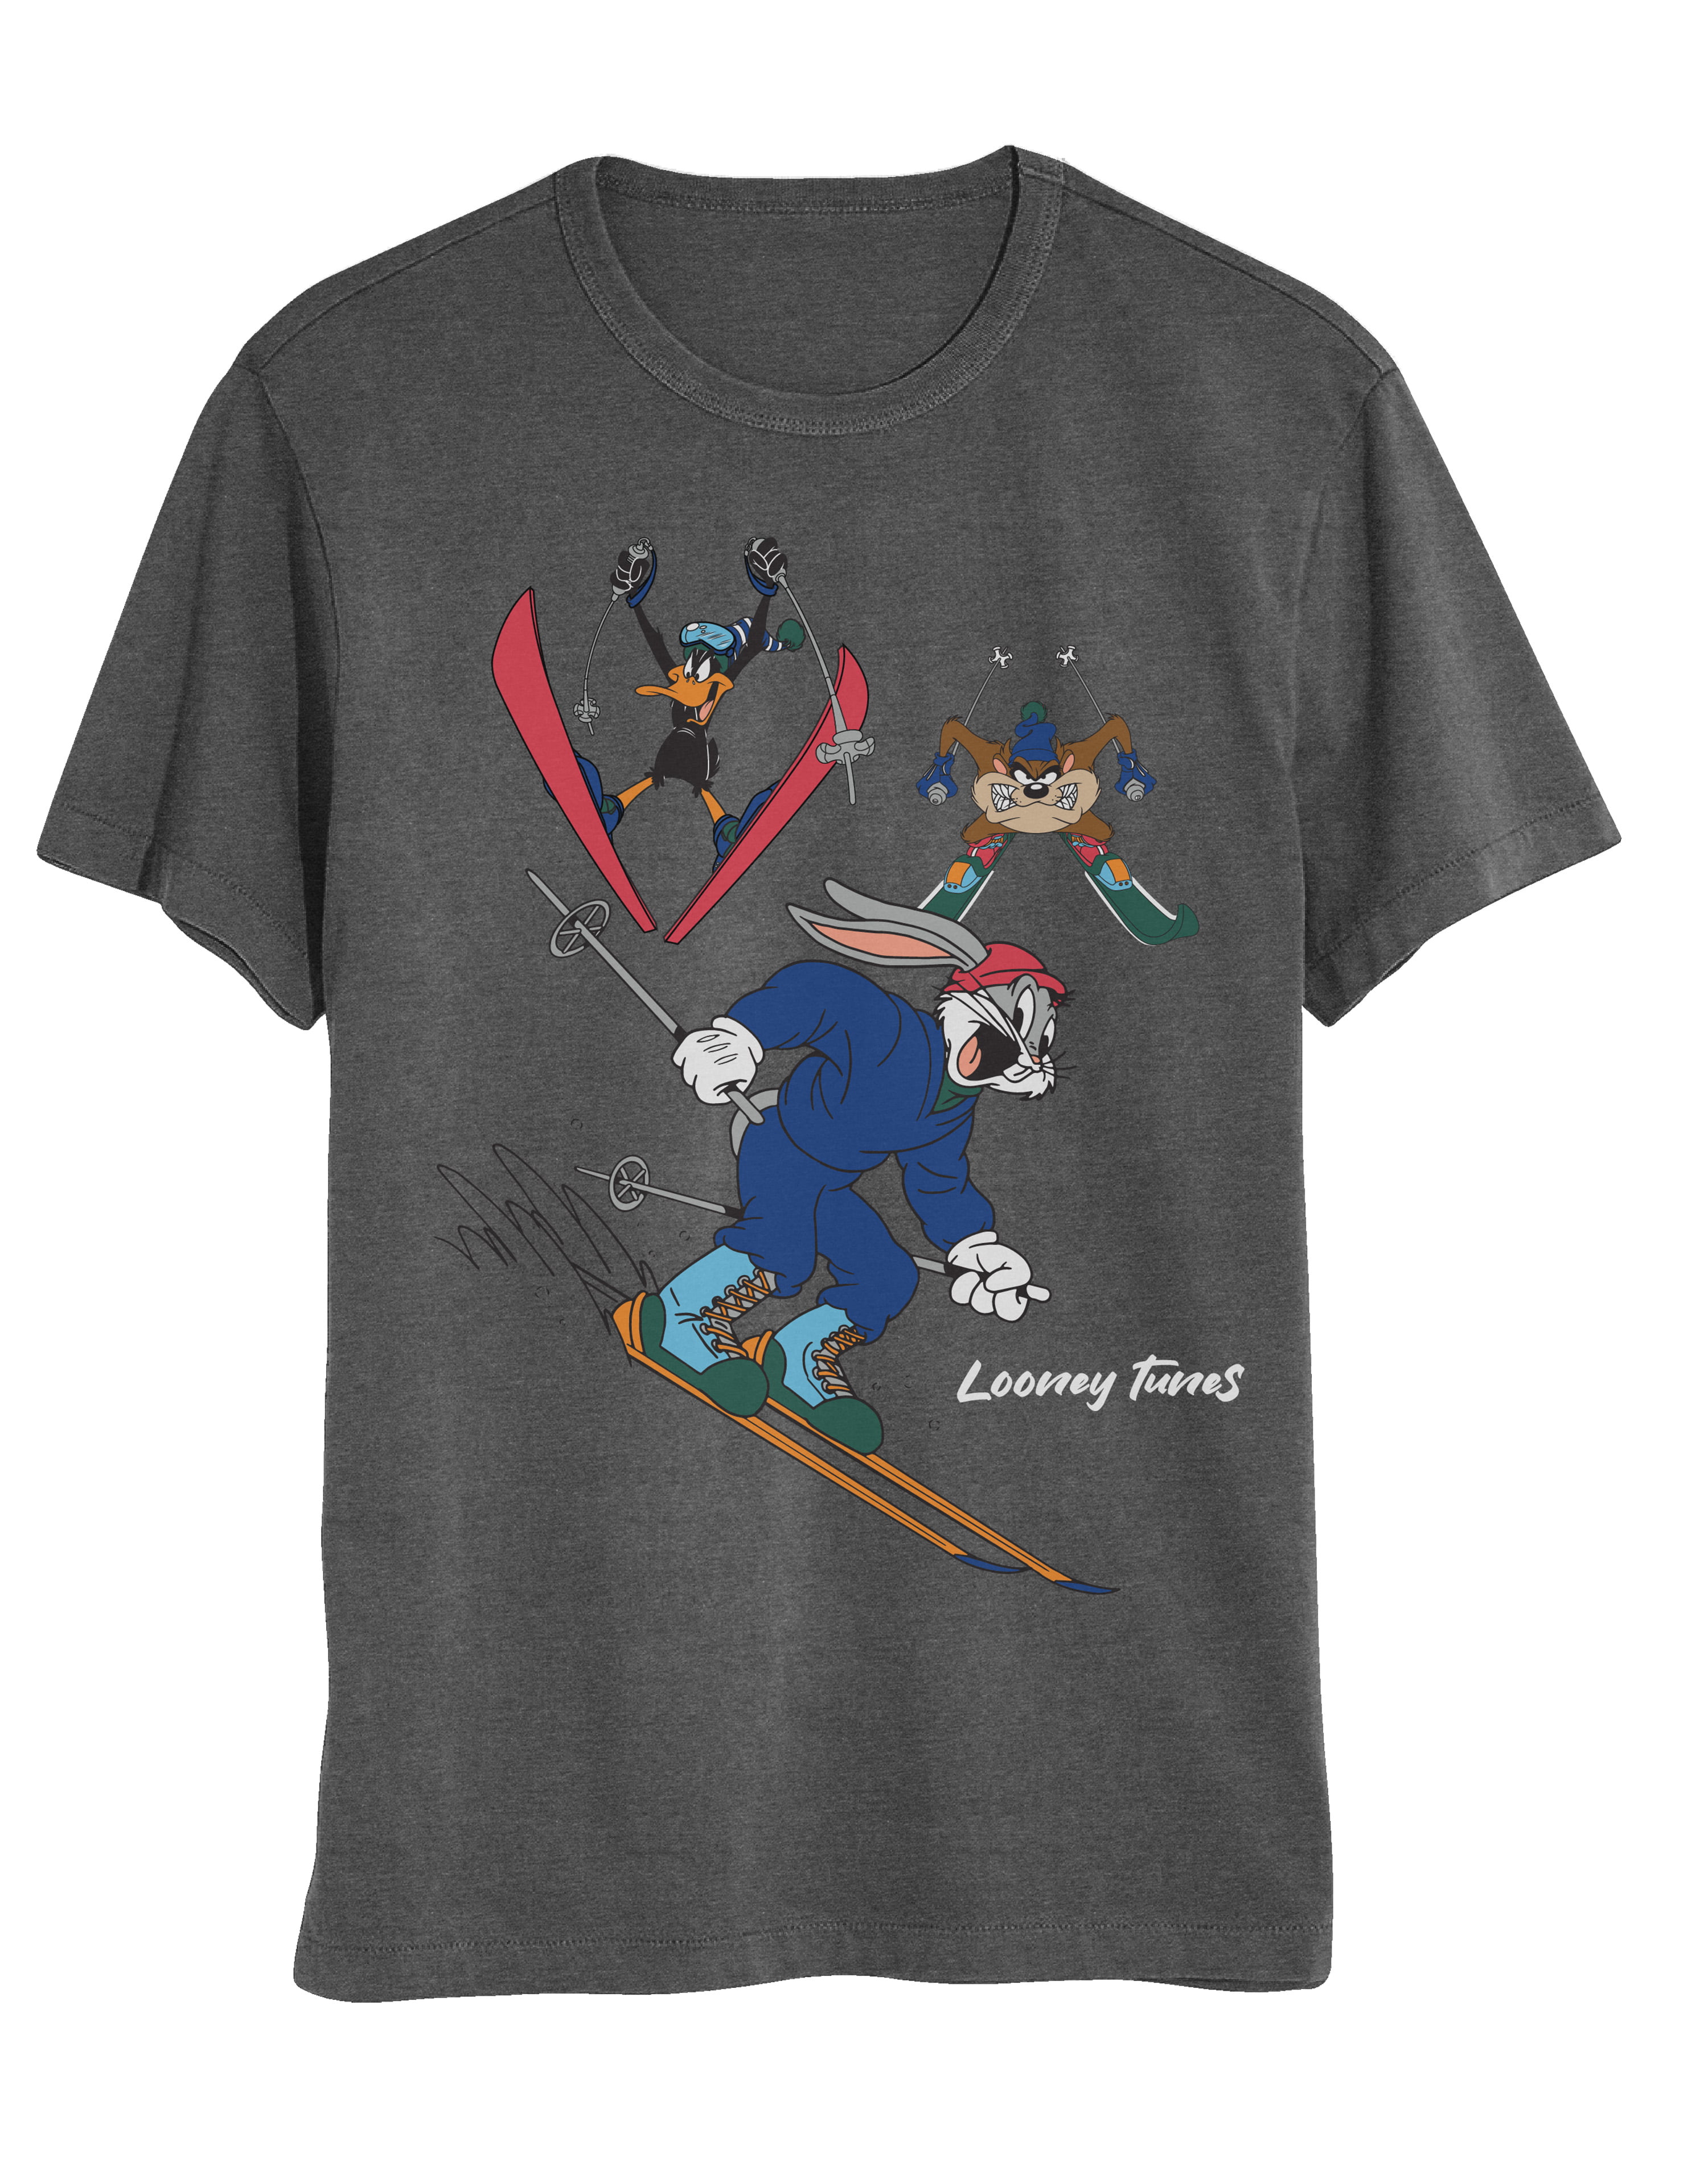 Looney Tunes Taz, Daffy and Bugs Bunny Skiing Mens and Womens Short Sleeve T -Shirt (Royal, S-XXL) 